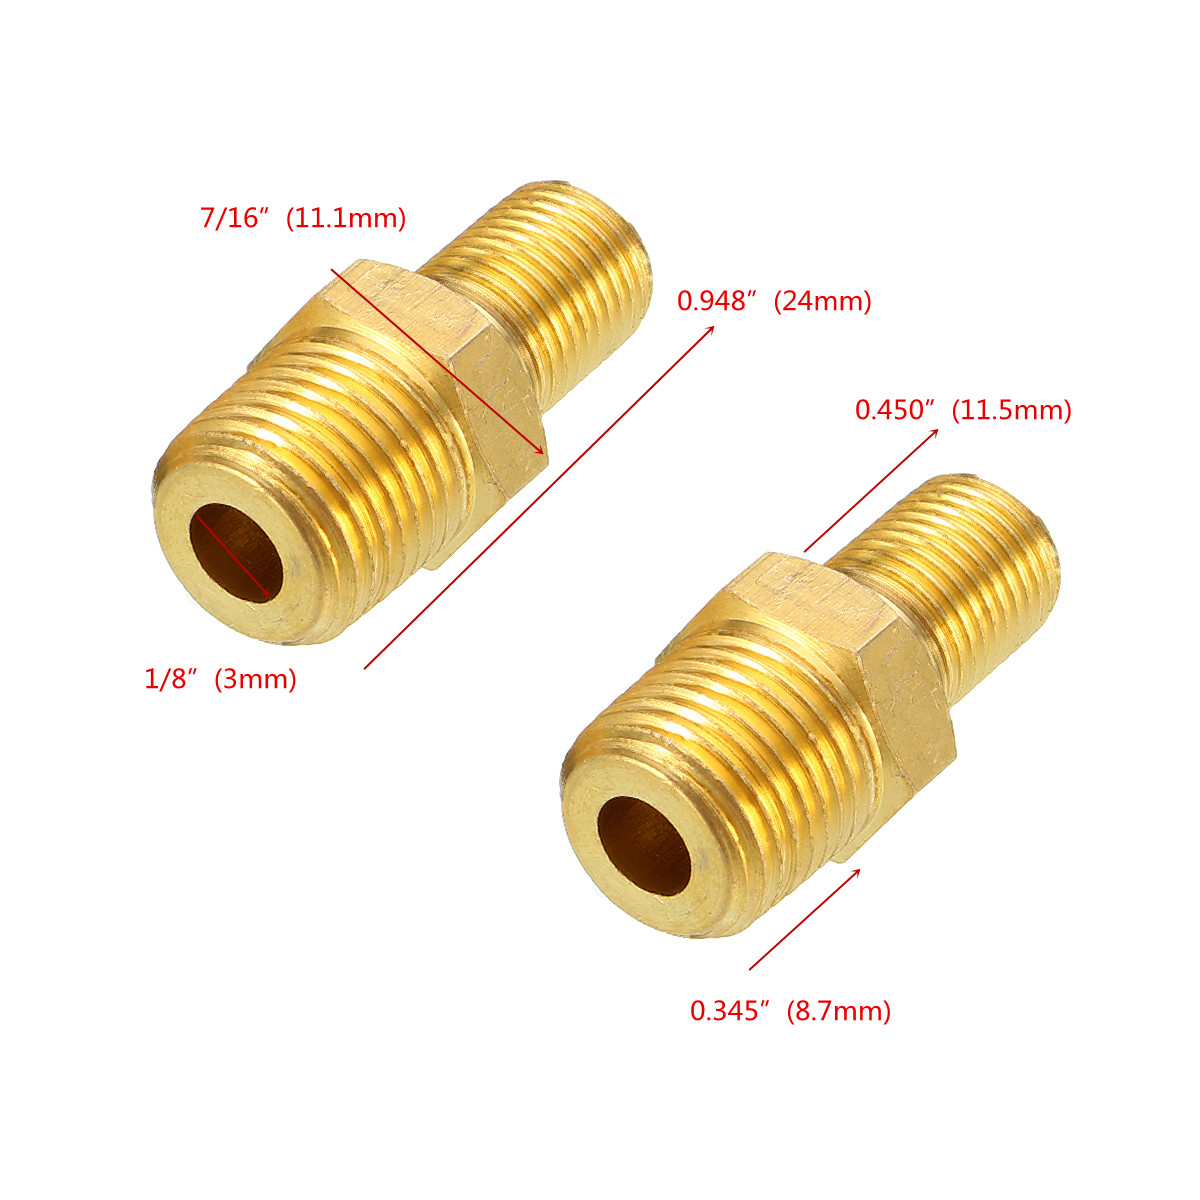 1/8" NPT Nickel Plated Brass Air Compressor Tank Fill Valve x2 Details about   